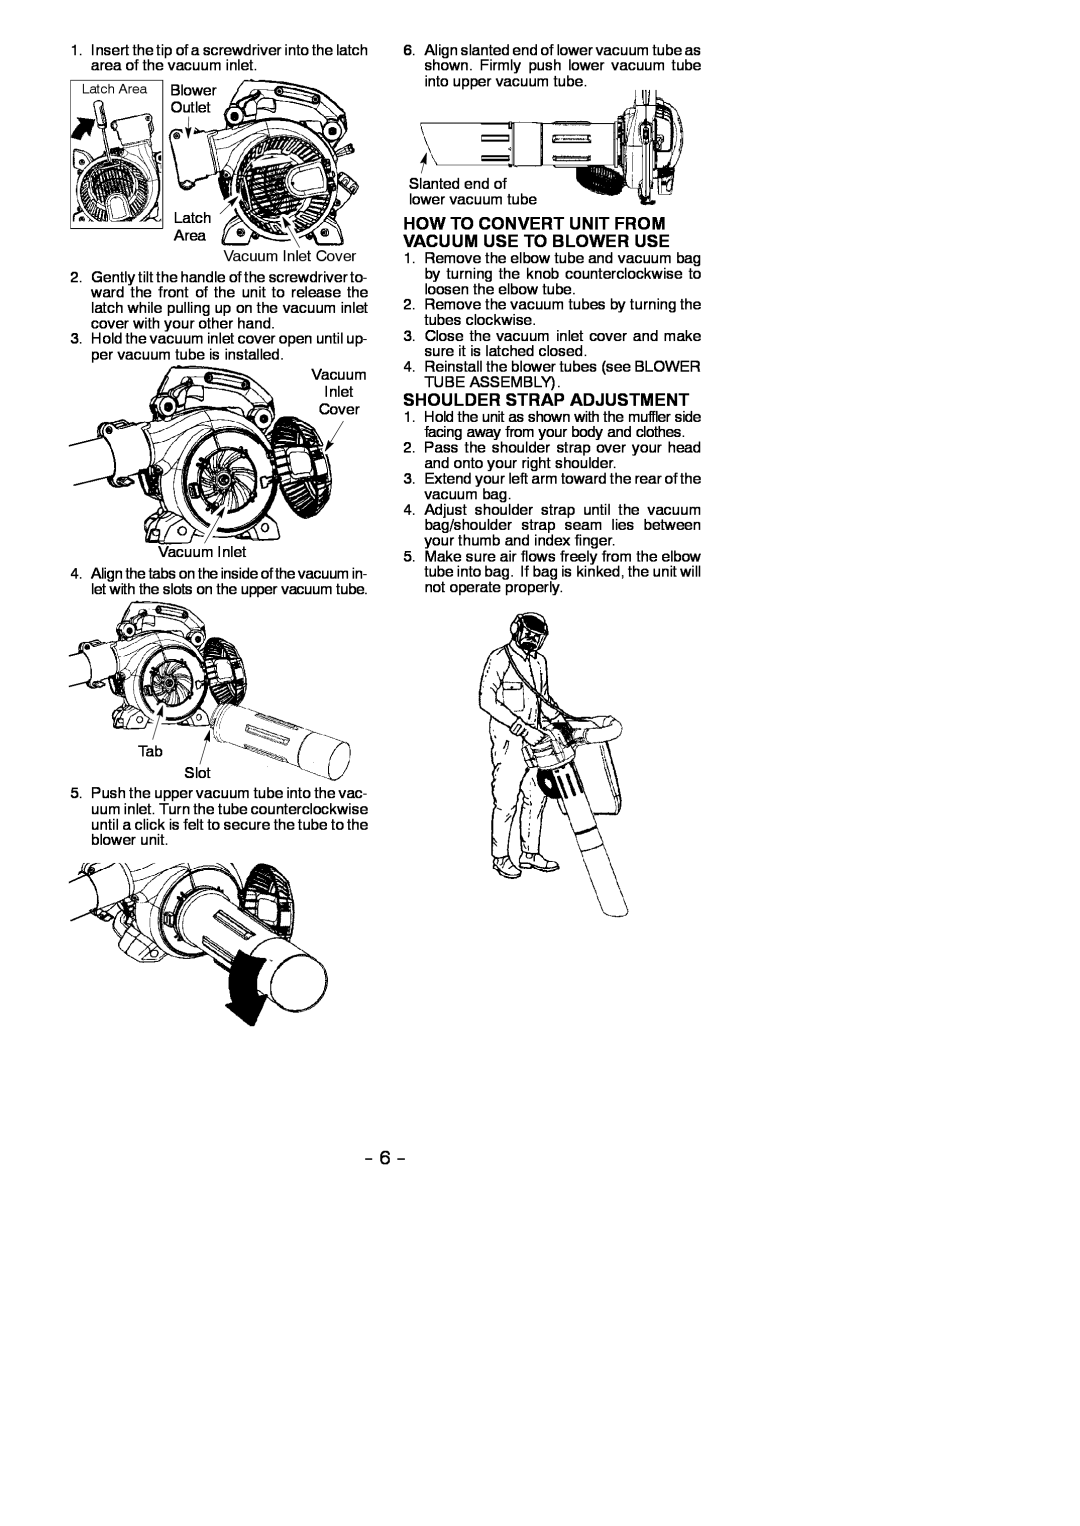 Poulan 545177387 instruction manual How To Convert Unit From Vacuum Use To Blower Use, Shoulder Strap Adjustment 